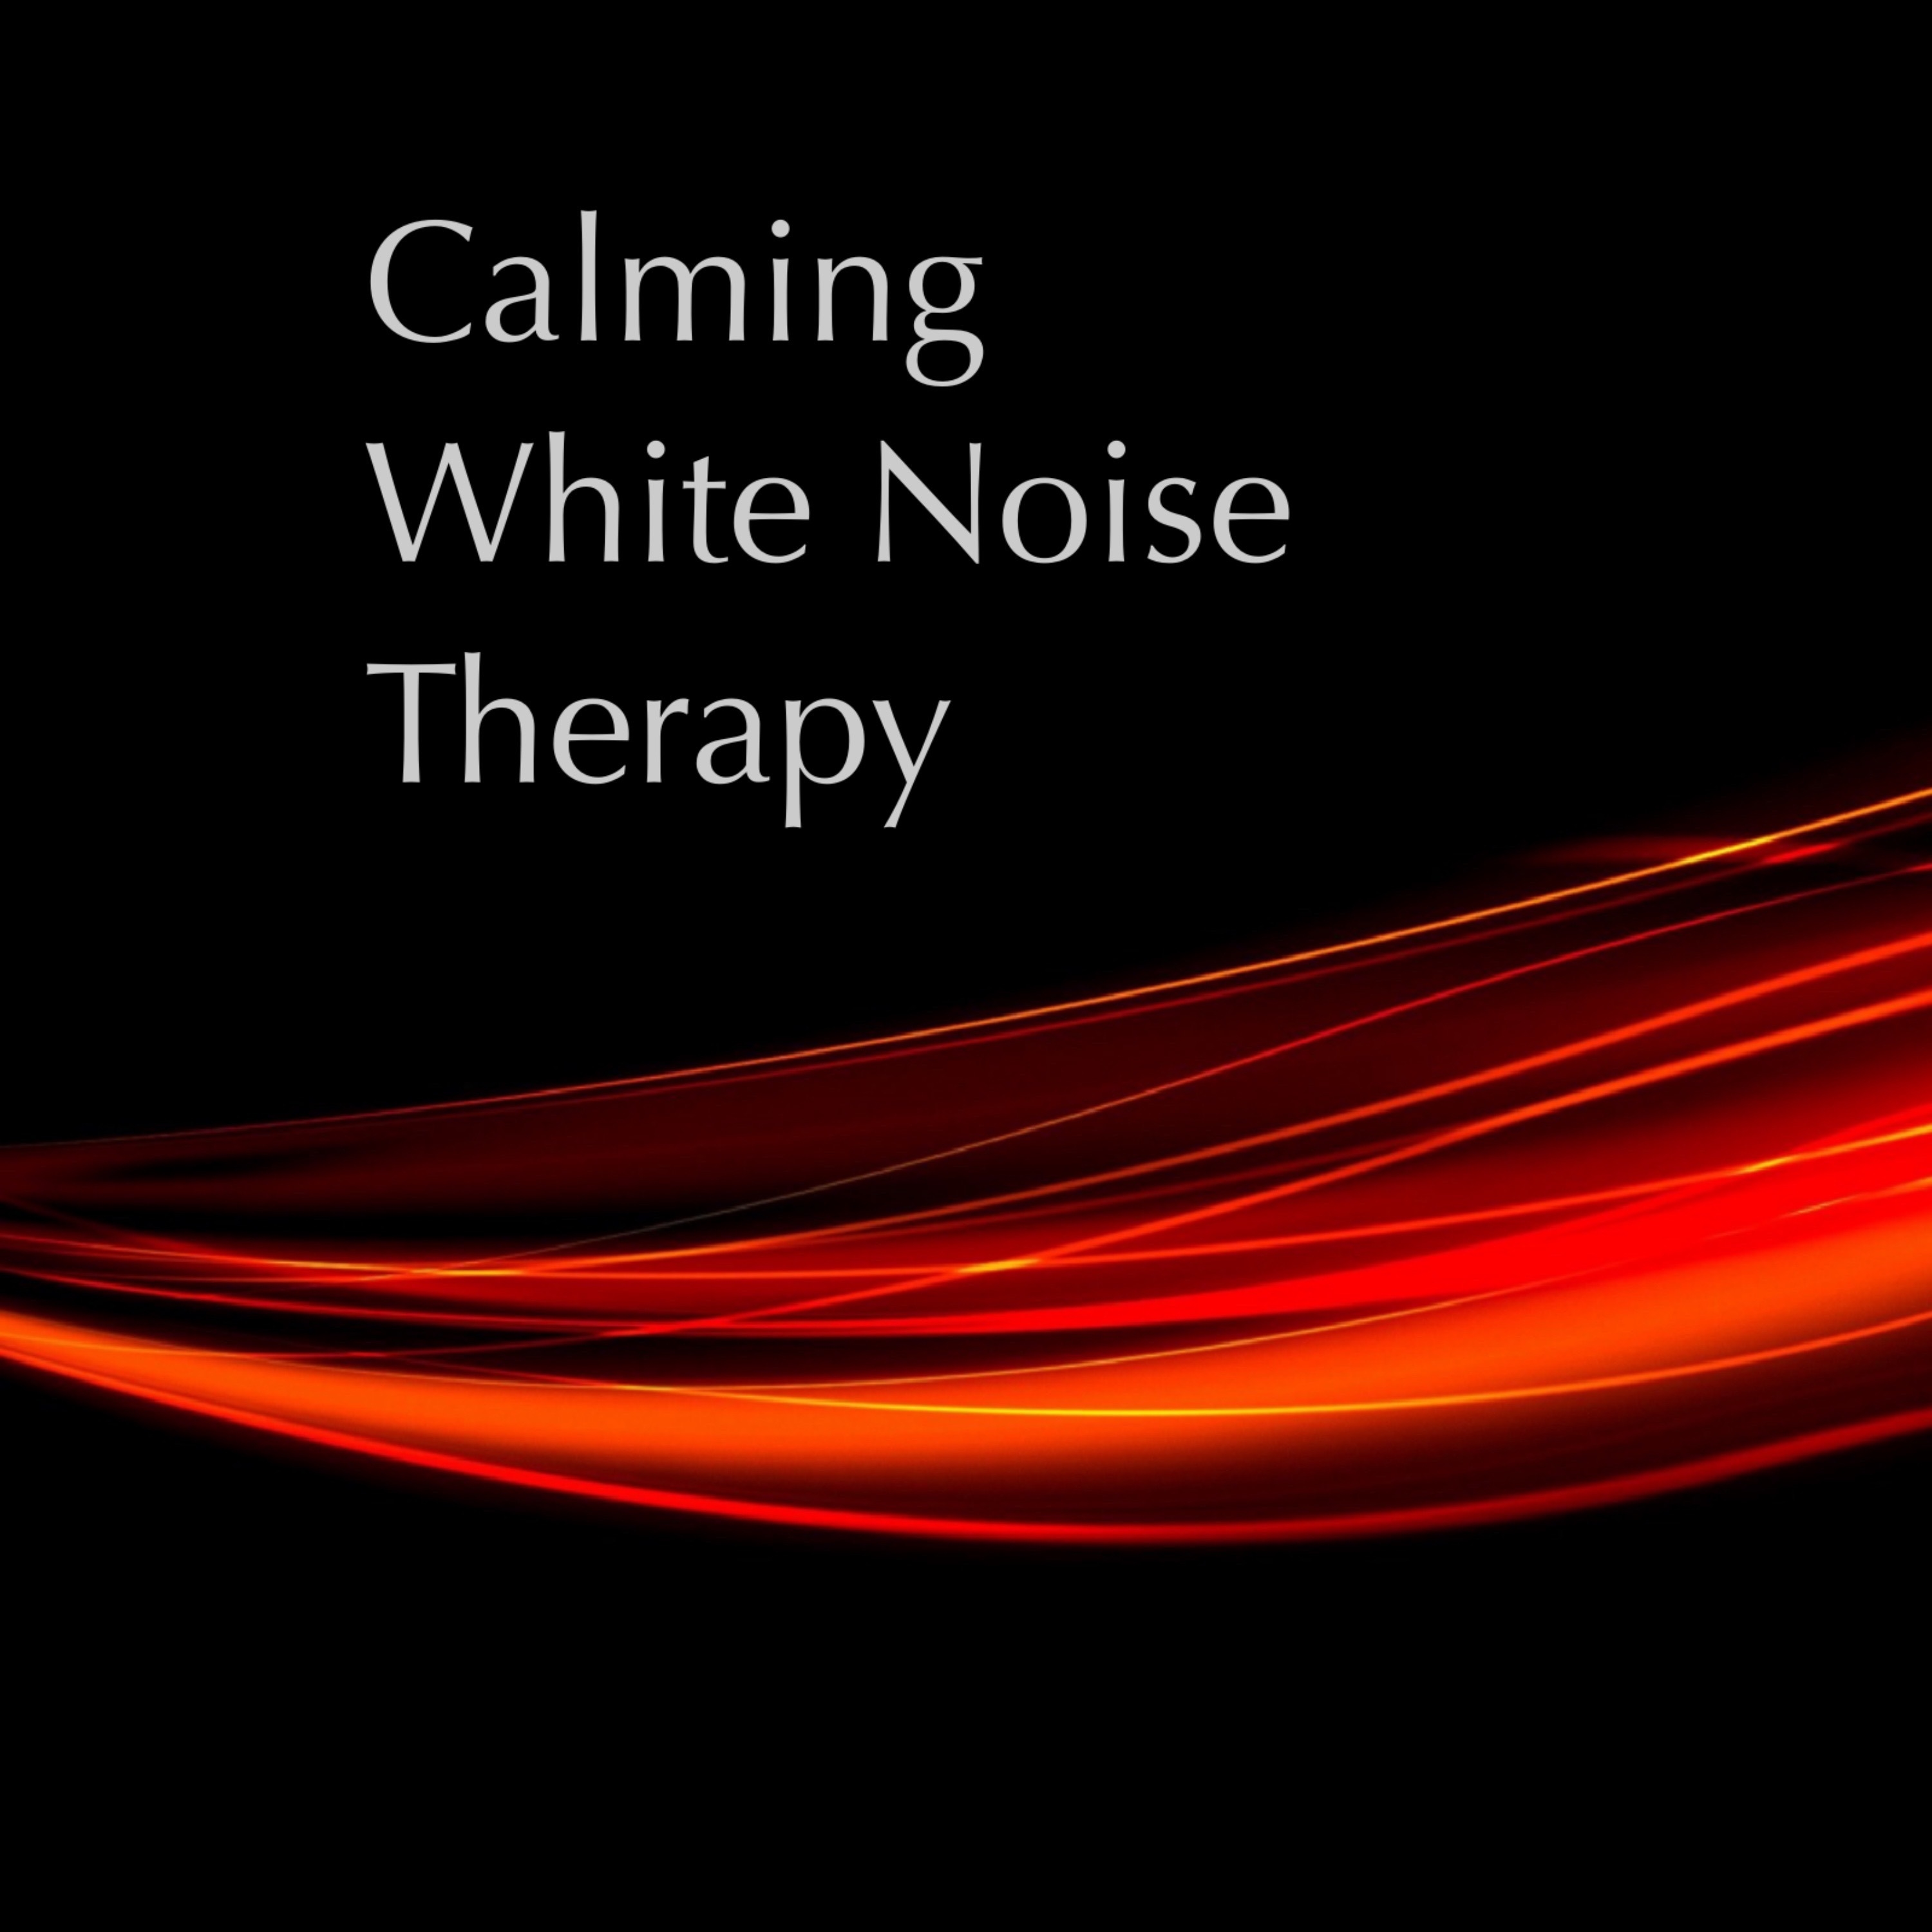 Calming White Noise Therapy